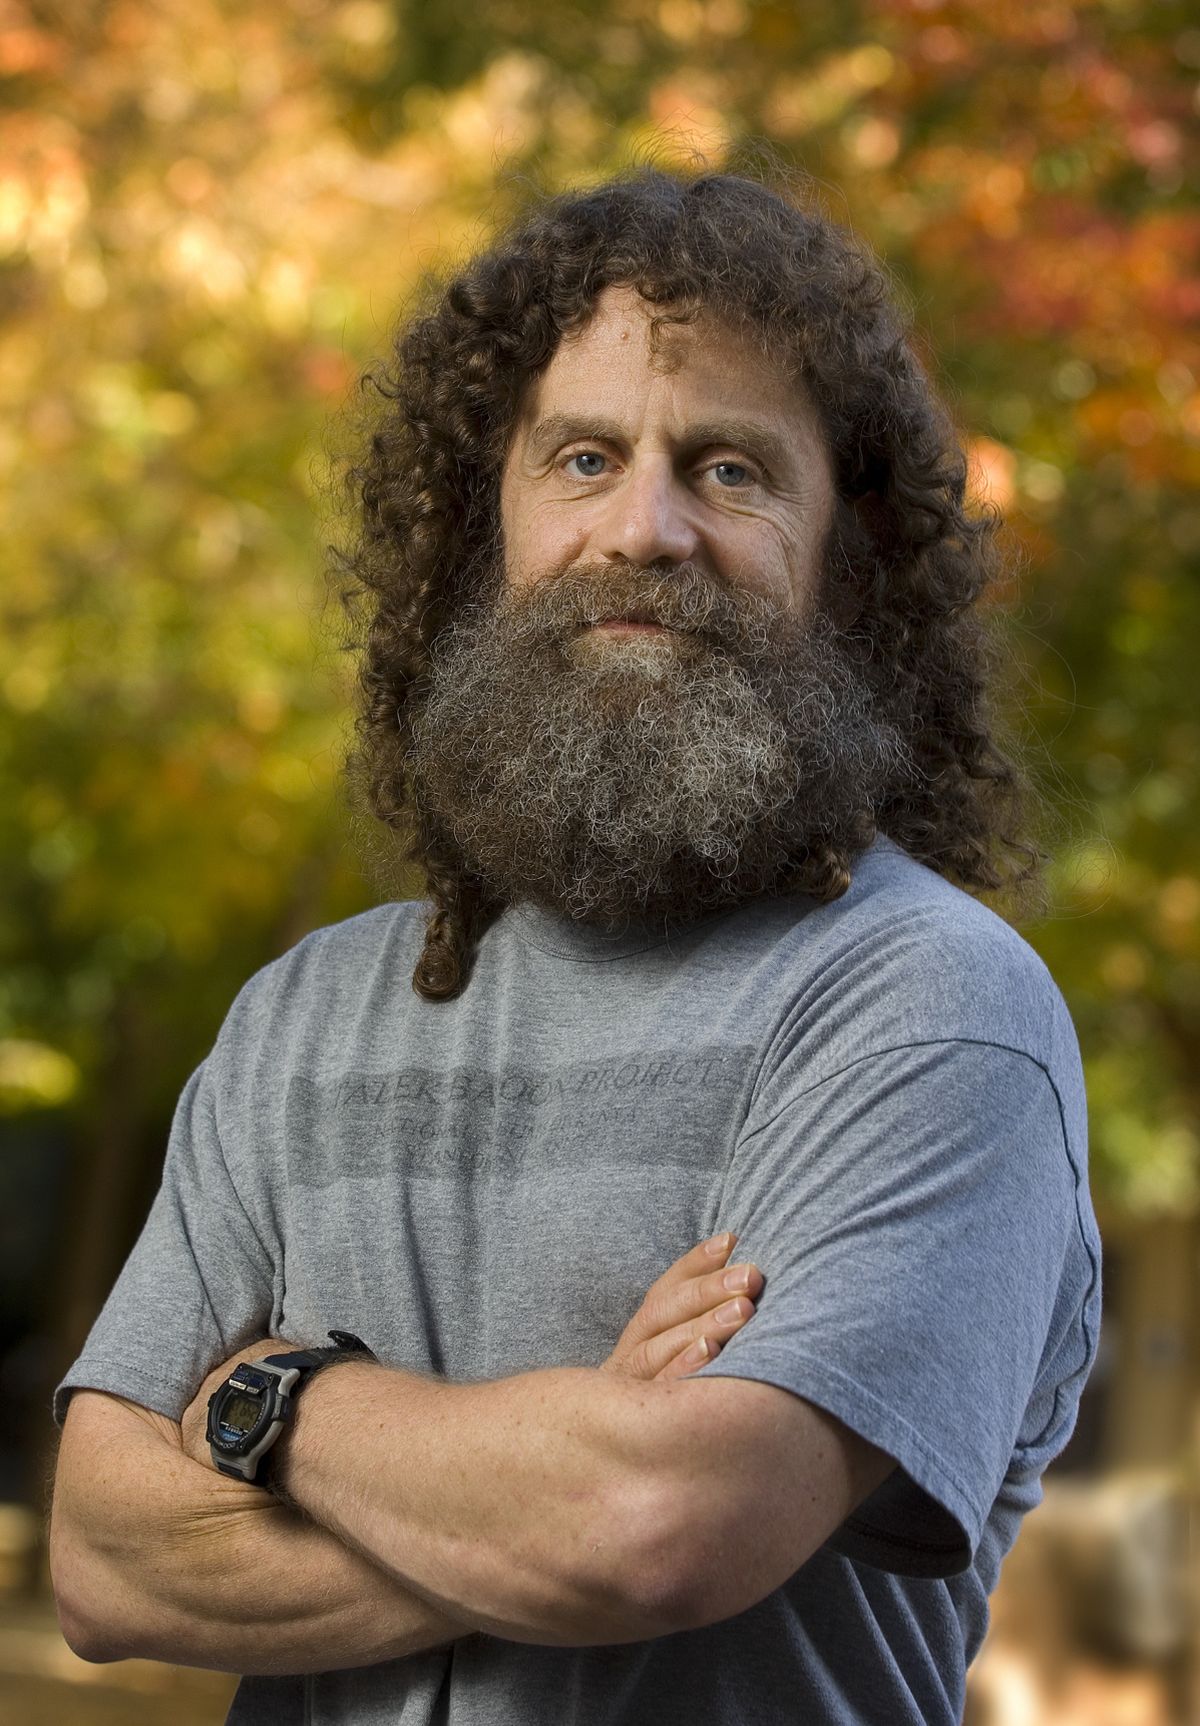 Robert Sapolsky, a neurobiologist at Stanford University and science writer, will speak Thursday in a free lecture about the connections between stress and overall health.